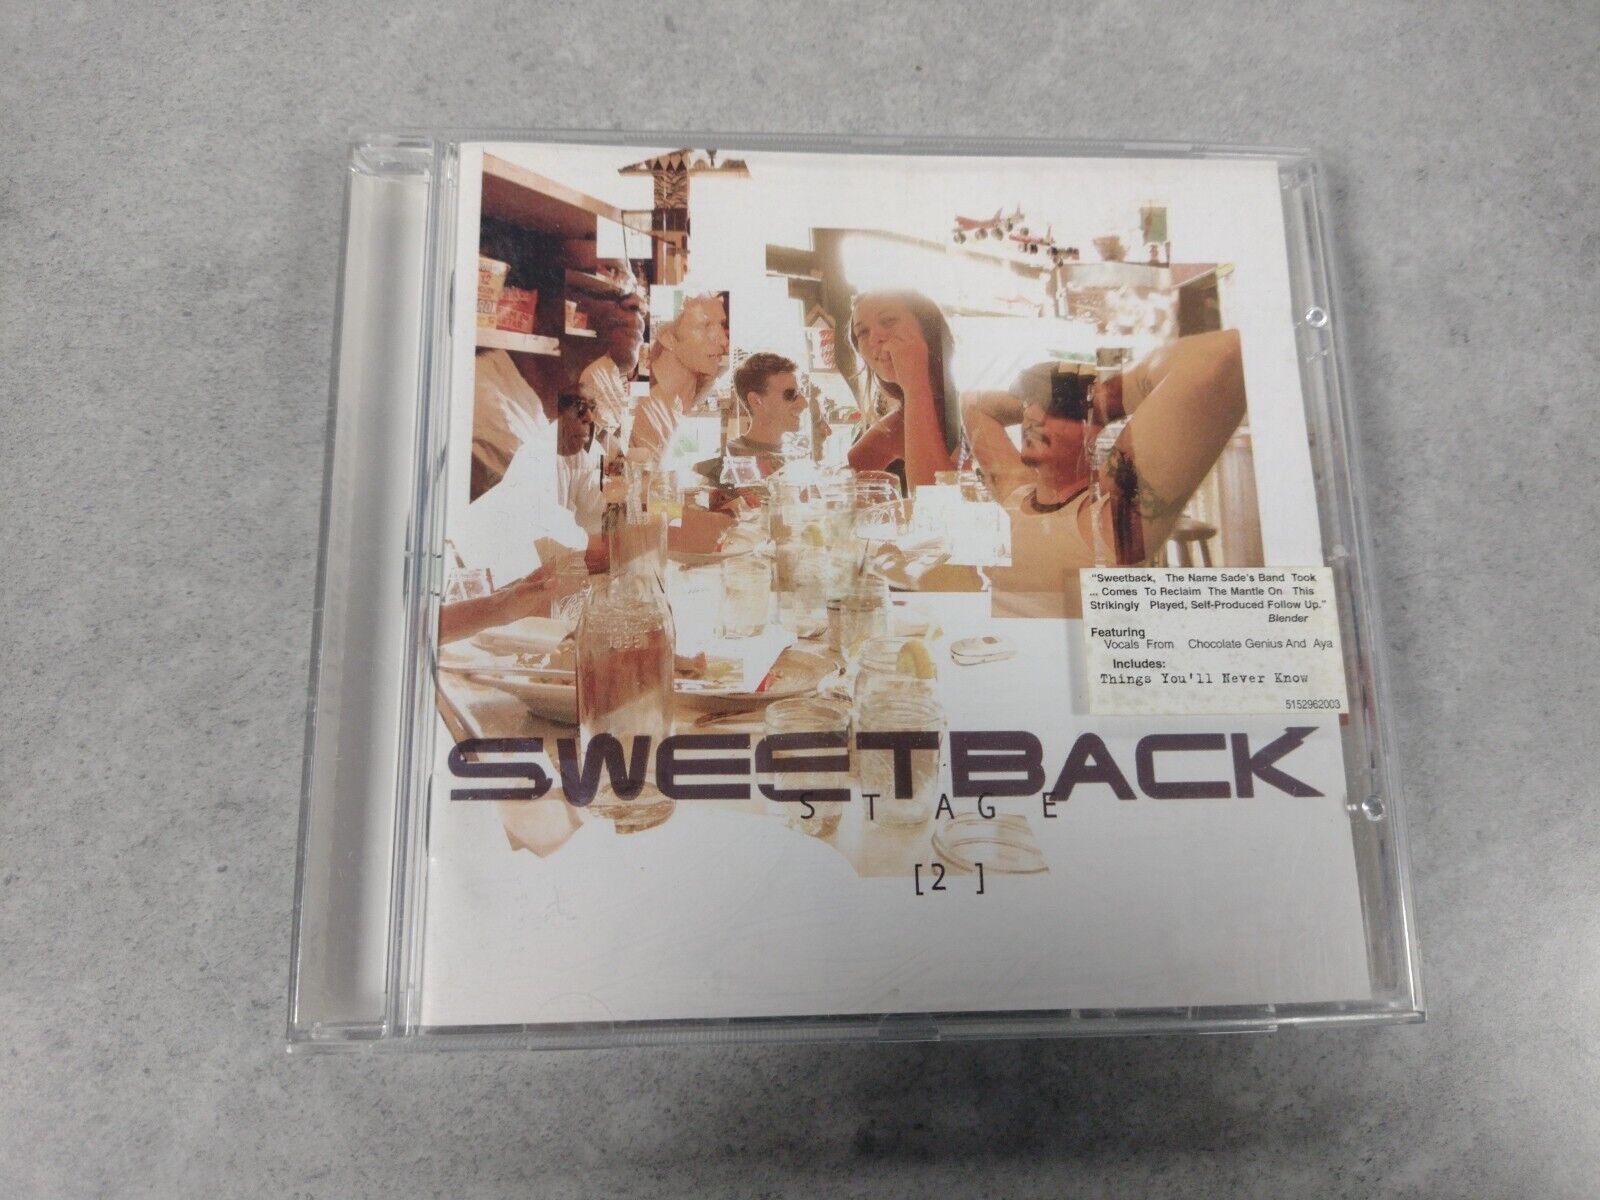 Sweetback - Stage 2 - Sweetback CD Album Sade Rare Excellent Condition 